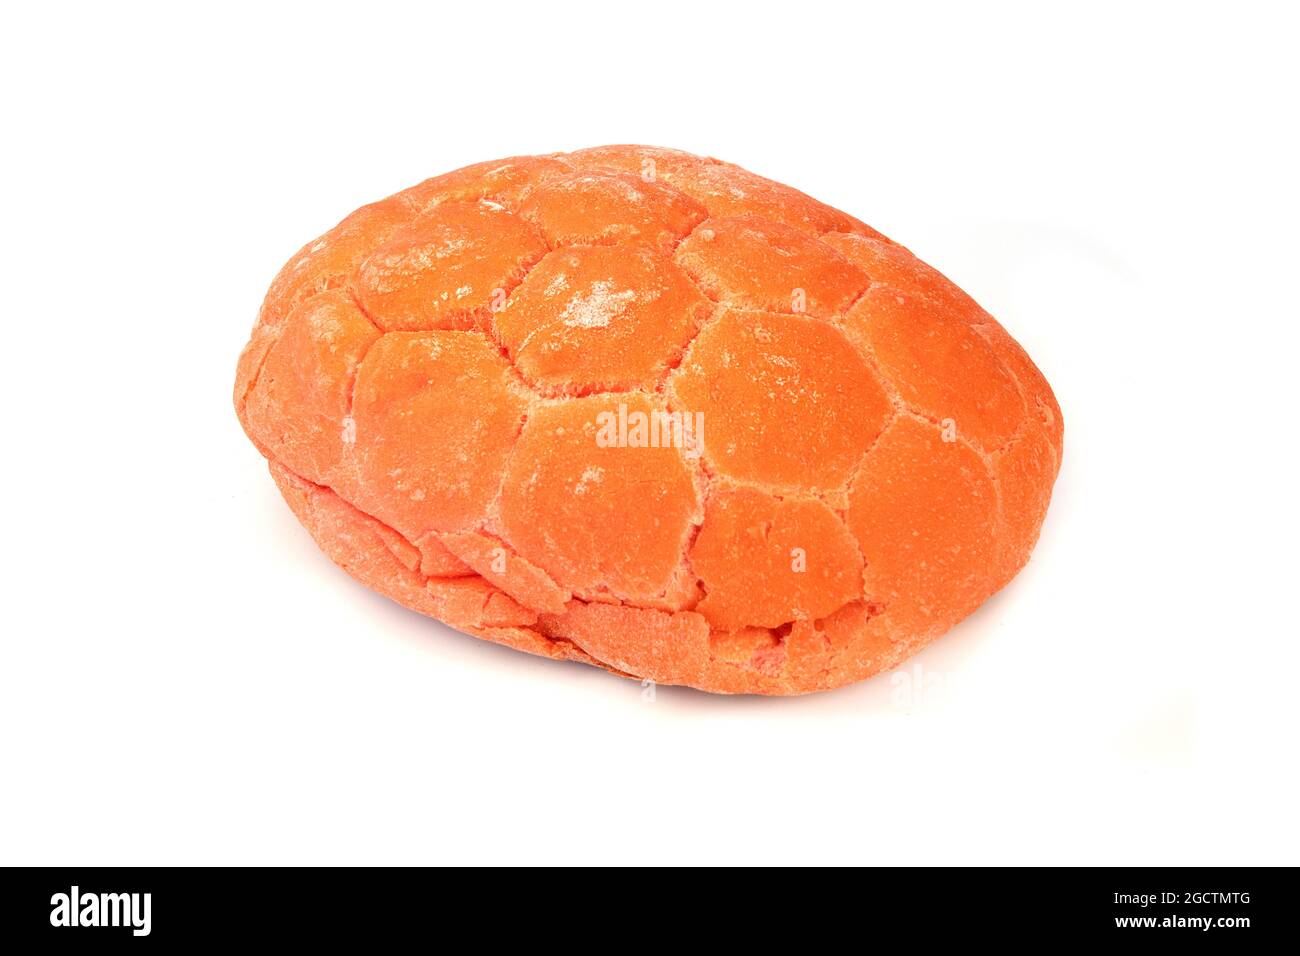 Tomato red bread on a white background Stock Photo